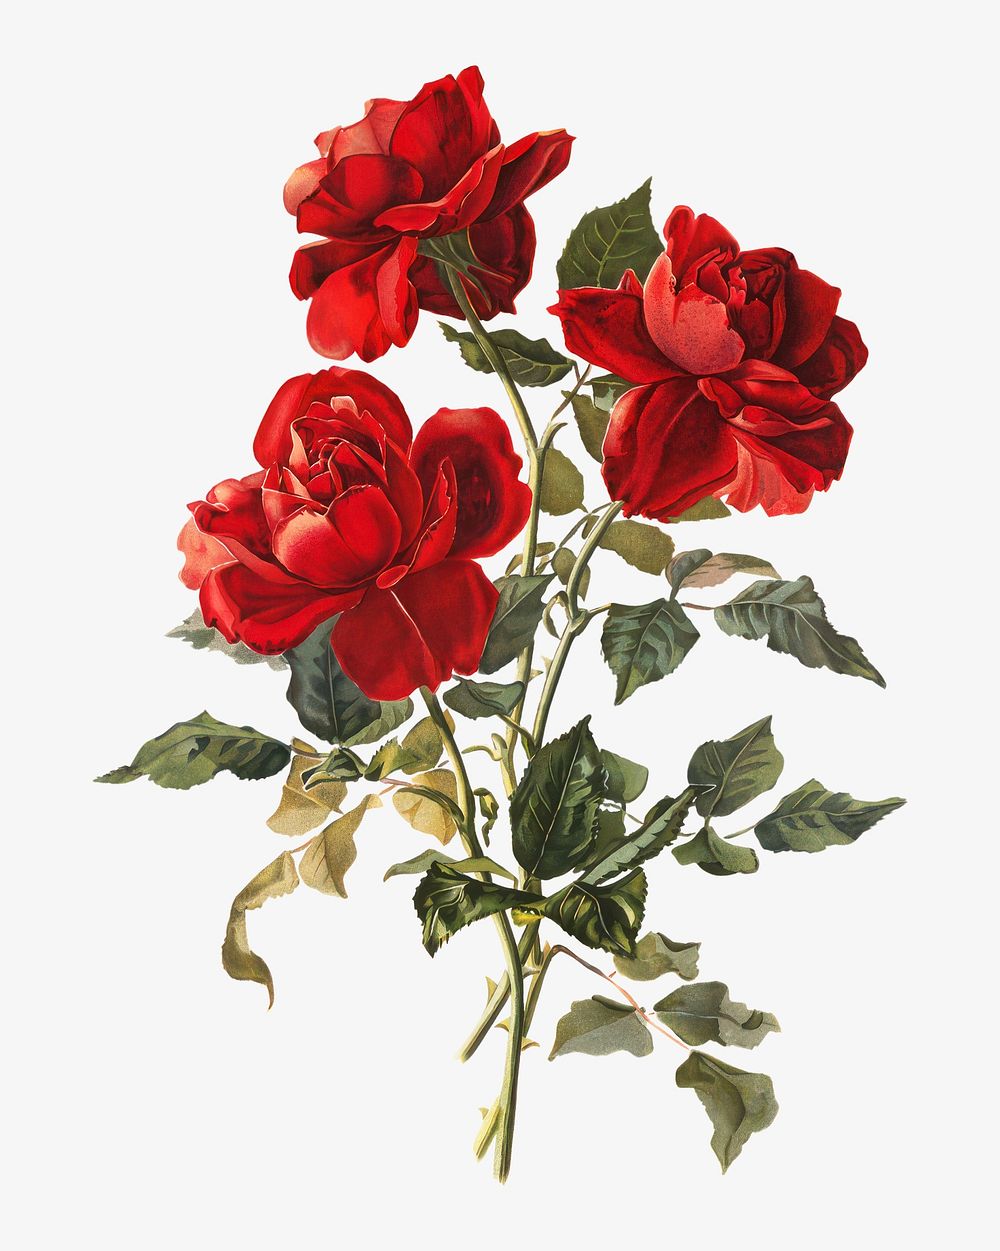 Red Roses, vntage flower illustration by Grace Barton Allen. Remixed by rawpixel.